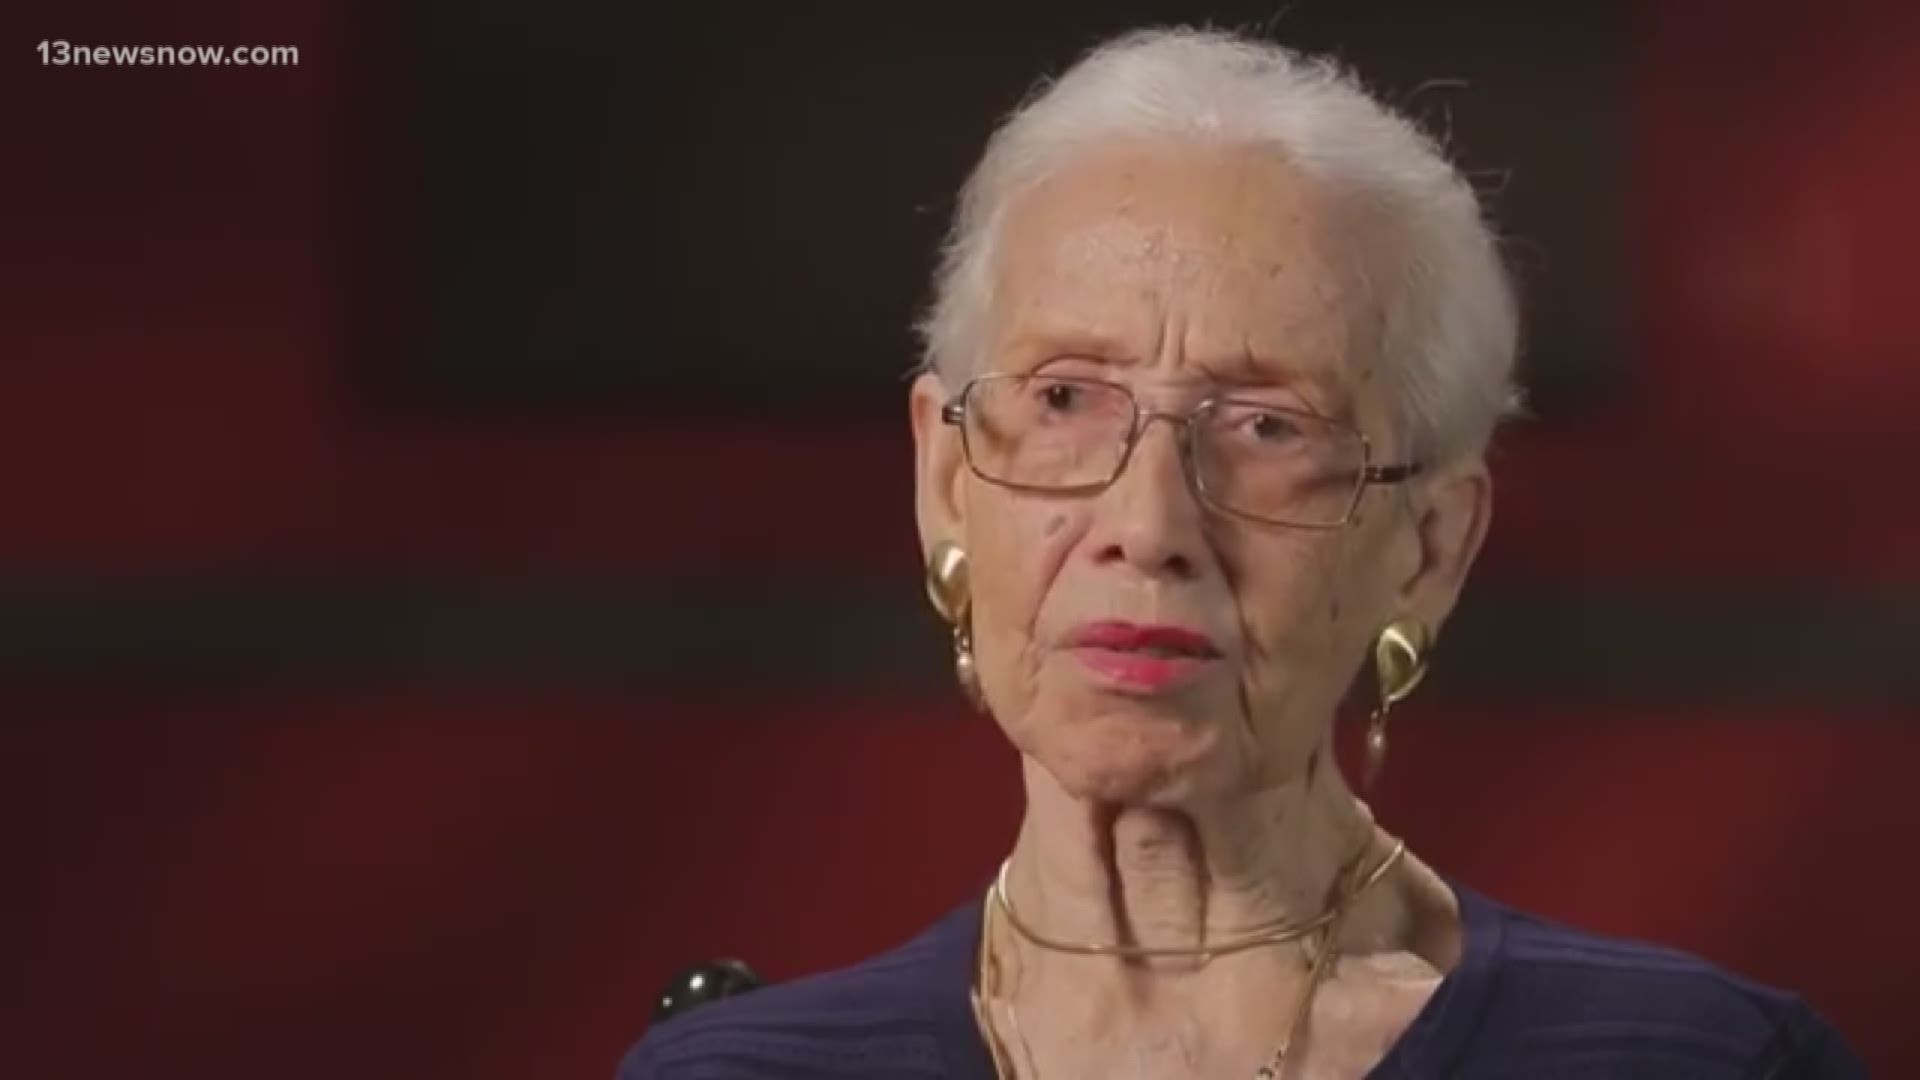 She's known as the human-computer. Katherine Johnson, one of the women the movie and book 'Hidden Figures' is about, turned 101.